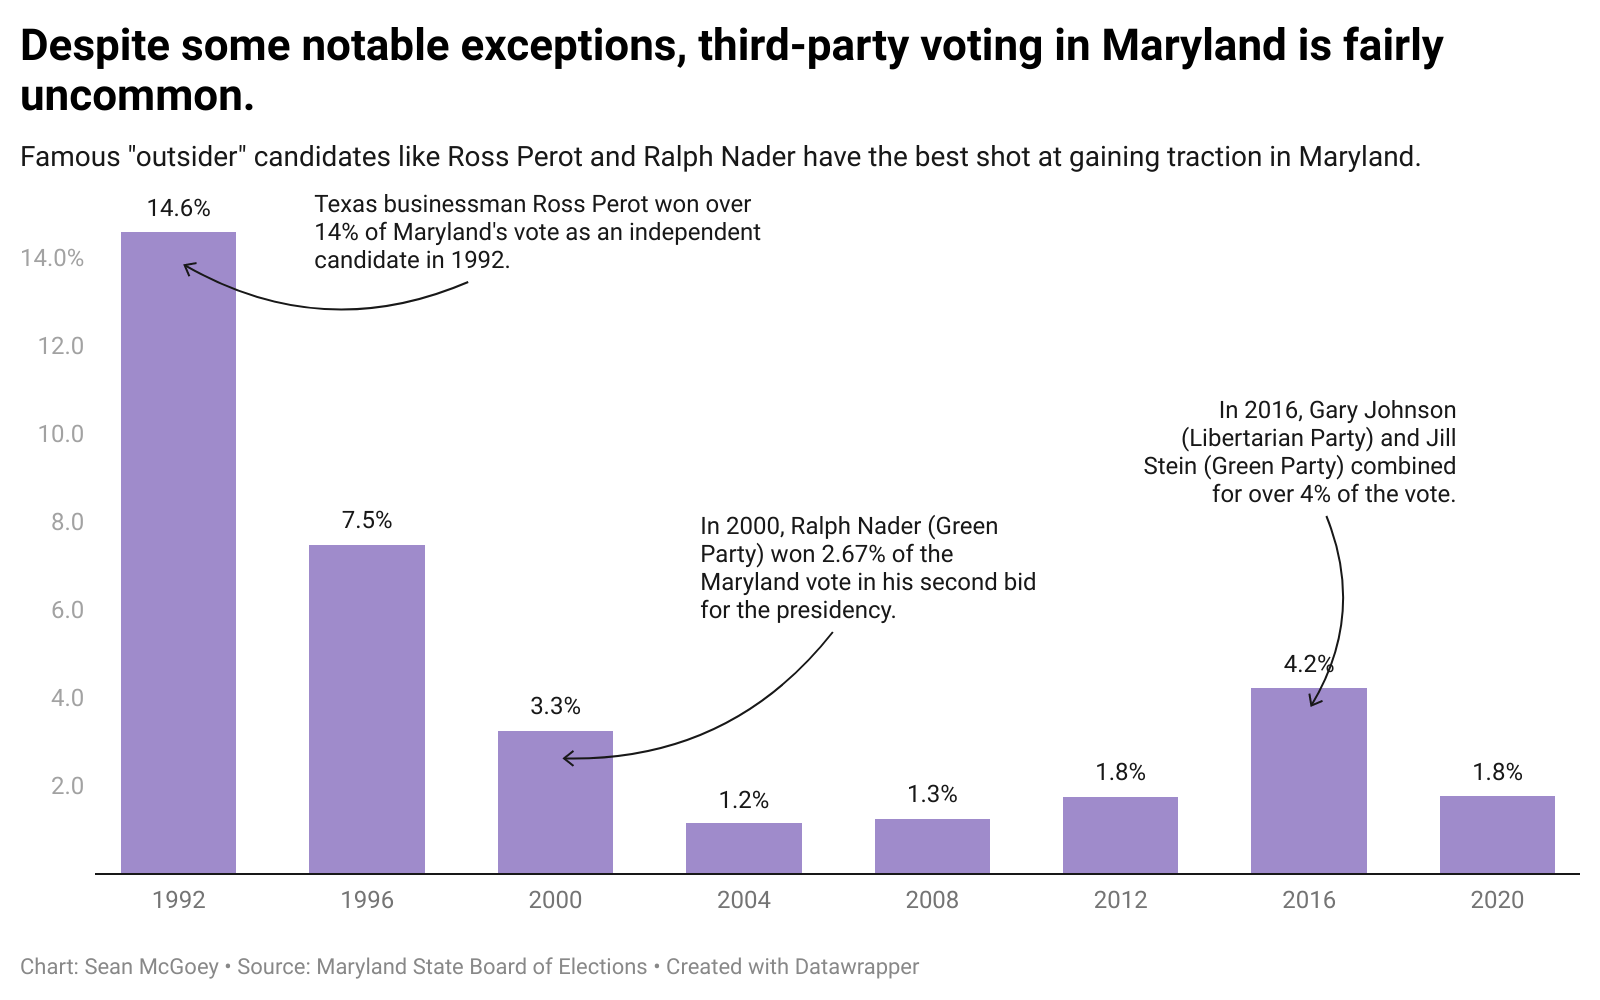 Despite some notable exceptions, third-party voting in Maryland is fairly uncommon.